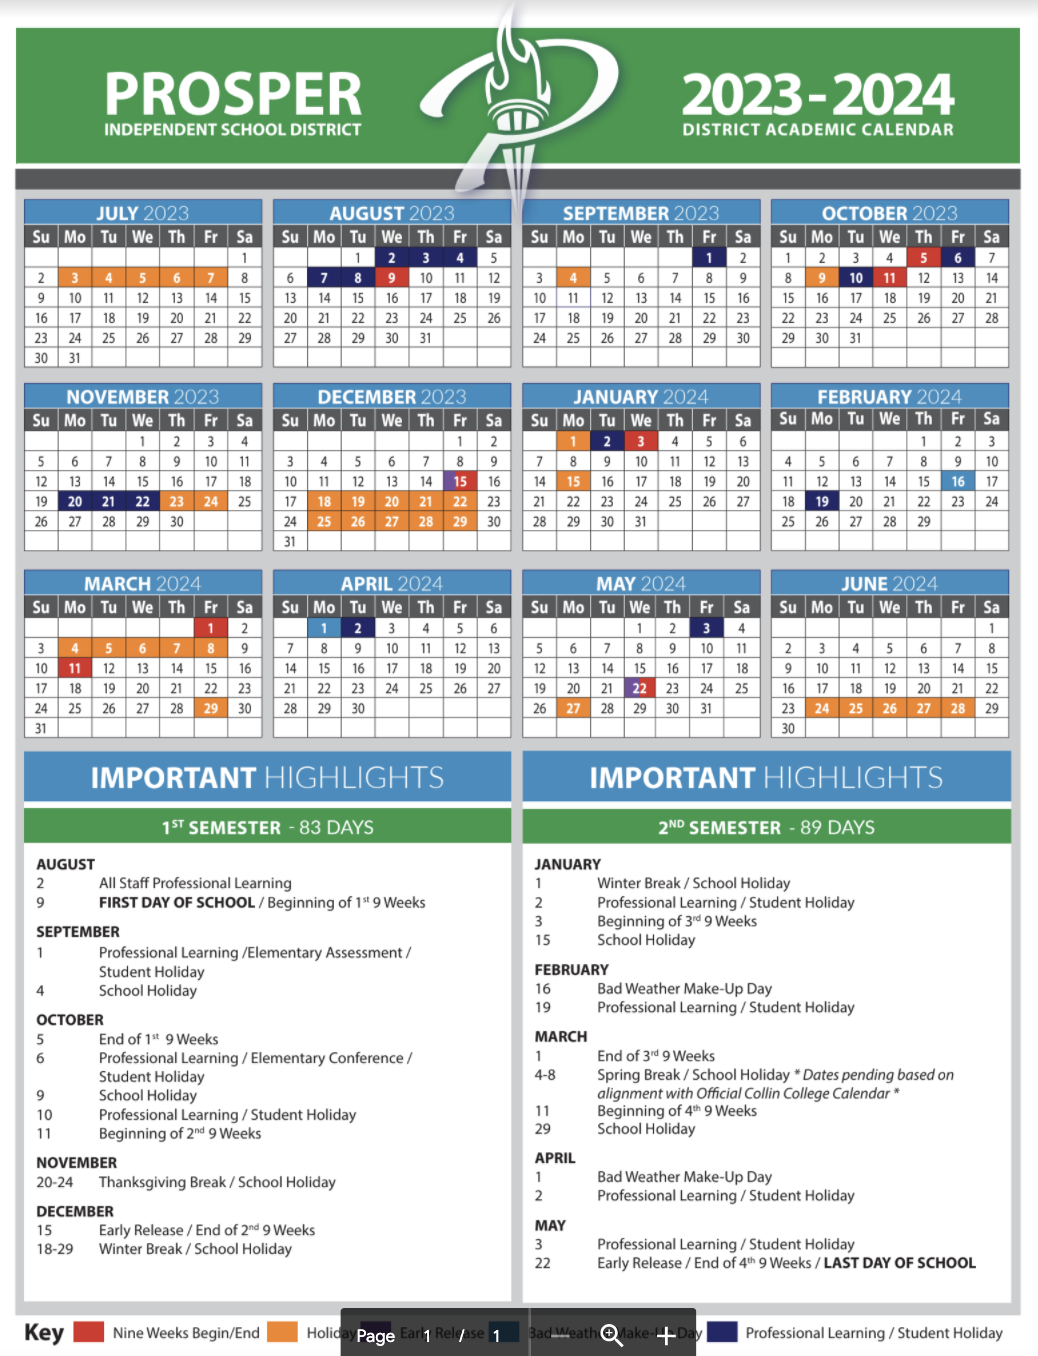 Frisco Isd Calendar 2022 23 Here Are Prosper Isd's School Calendars For The 2022-2023 And The 2023-2024  School Years | Cities | Checkoutdfw.com